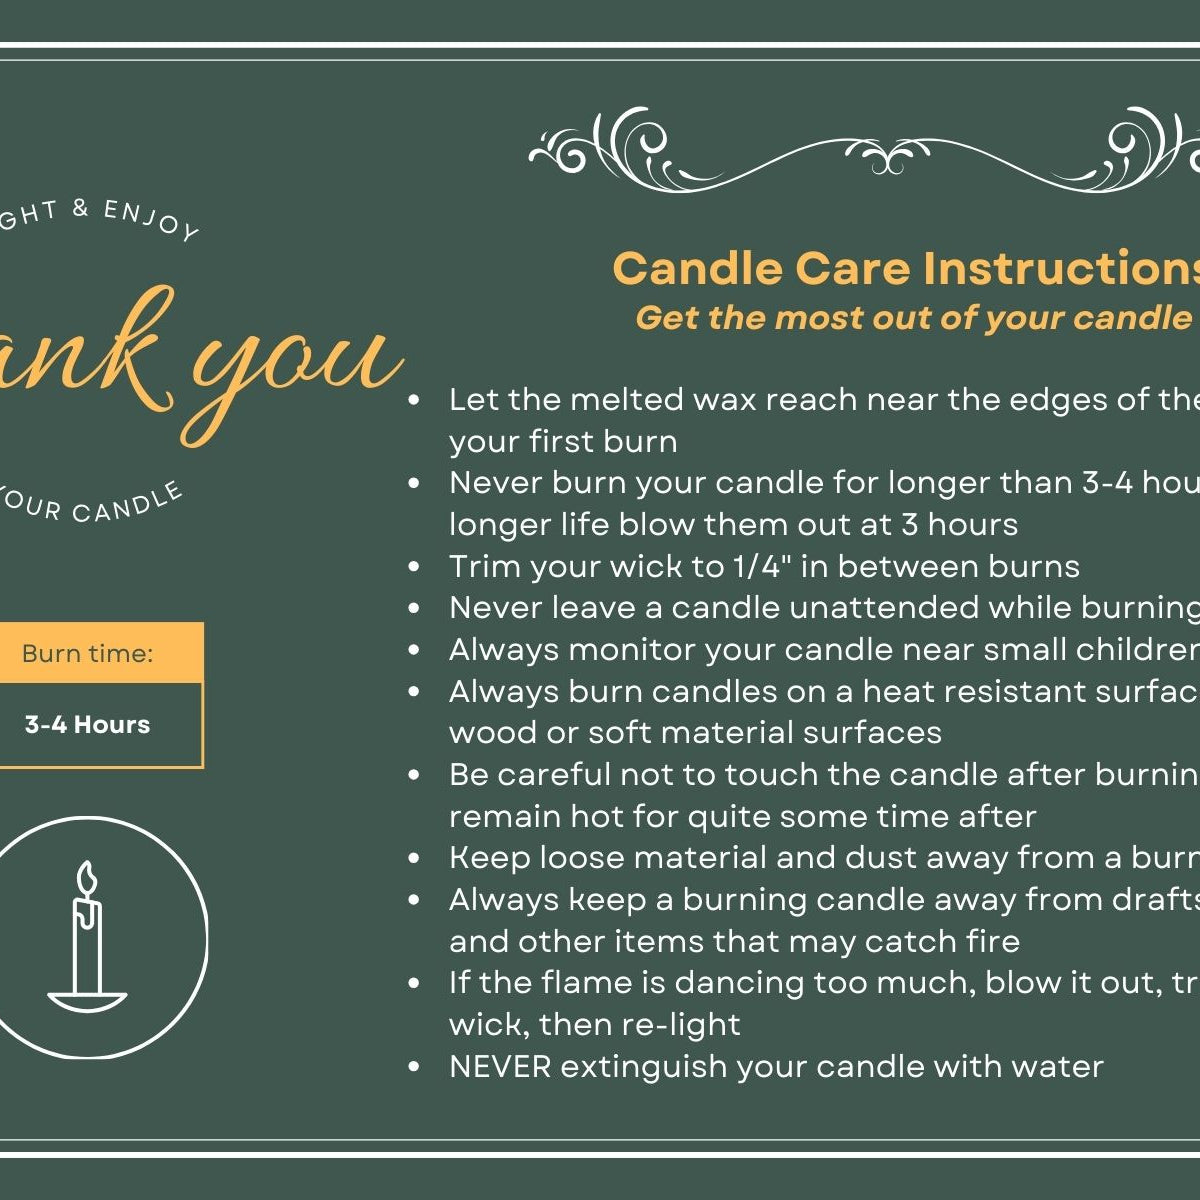 Printed Green & Yellow Candle Care Cards | 50